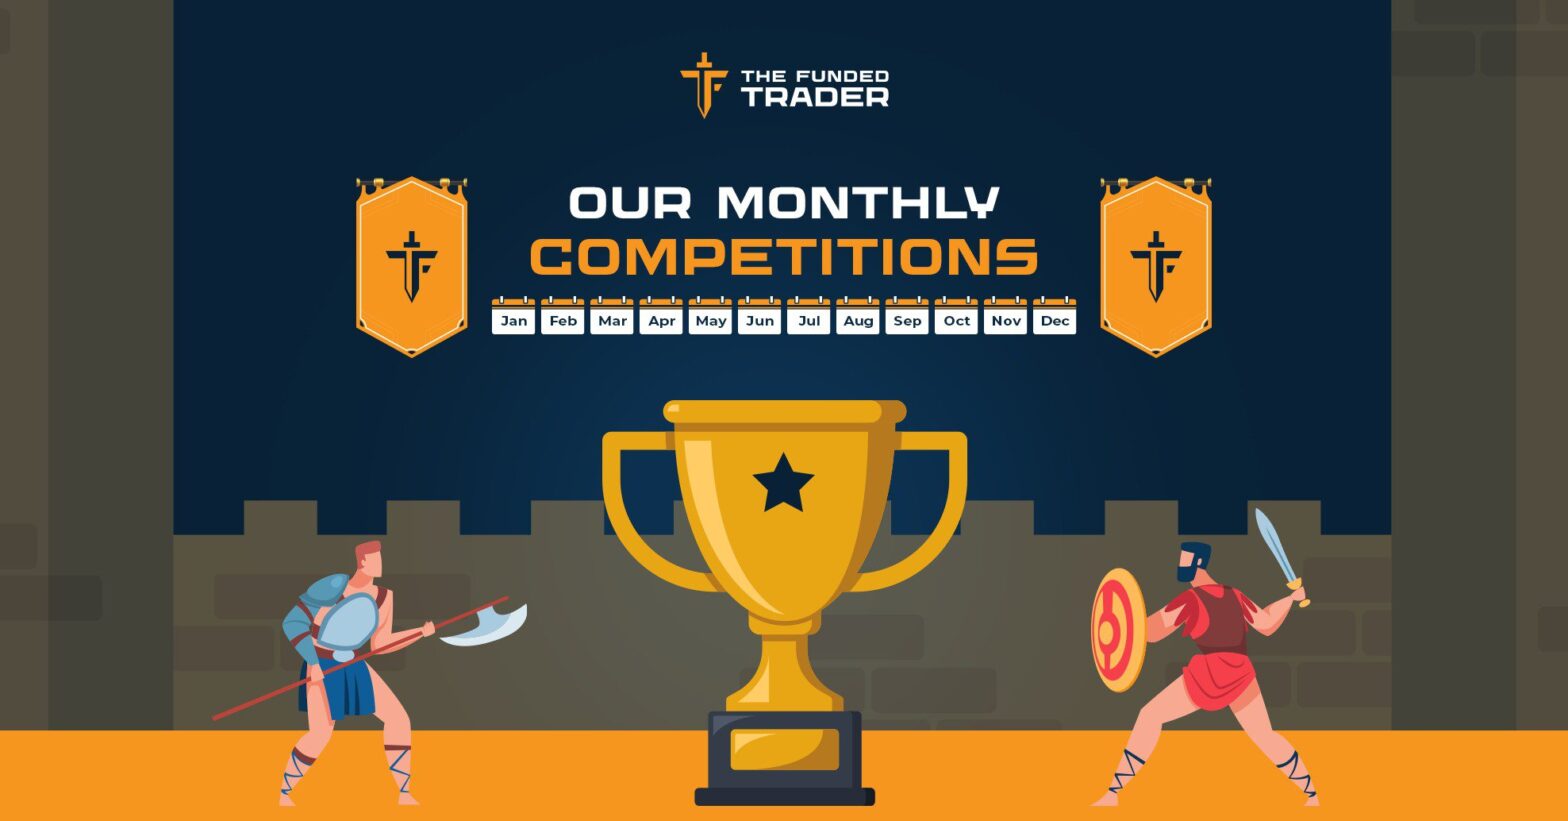 The Funded Trader competitions